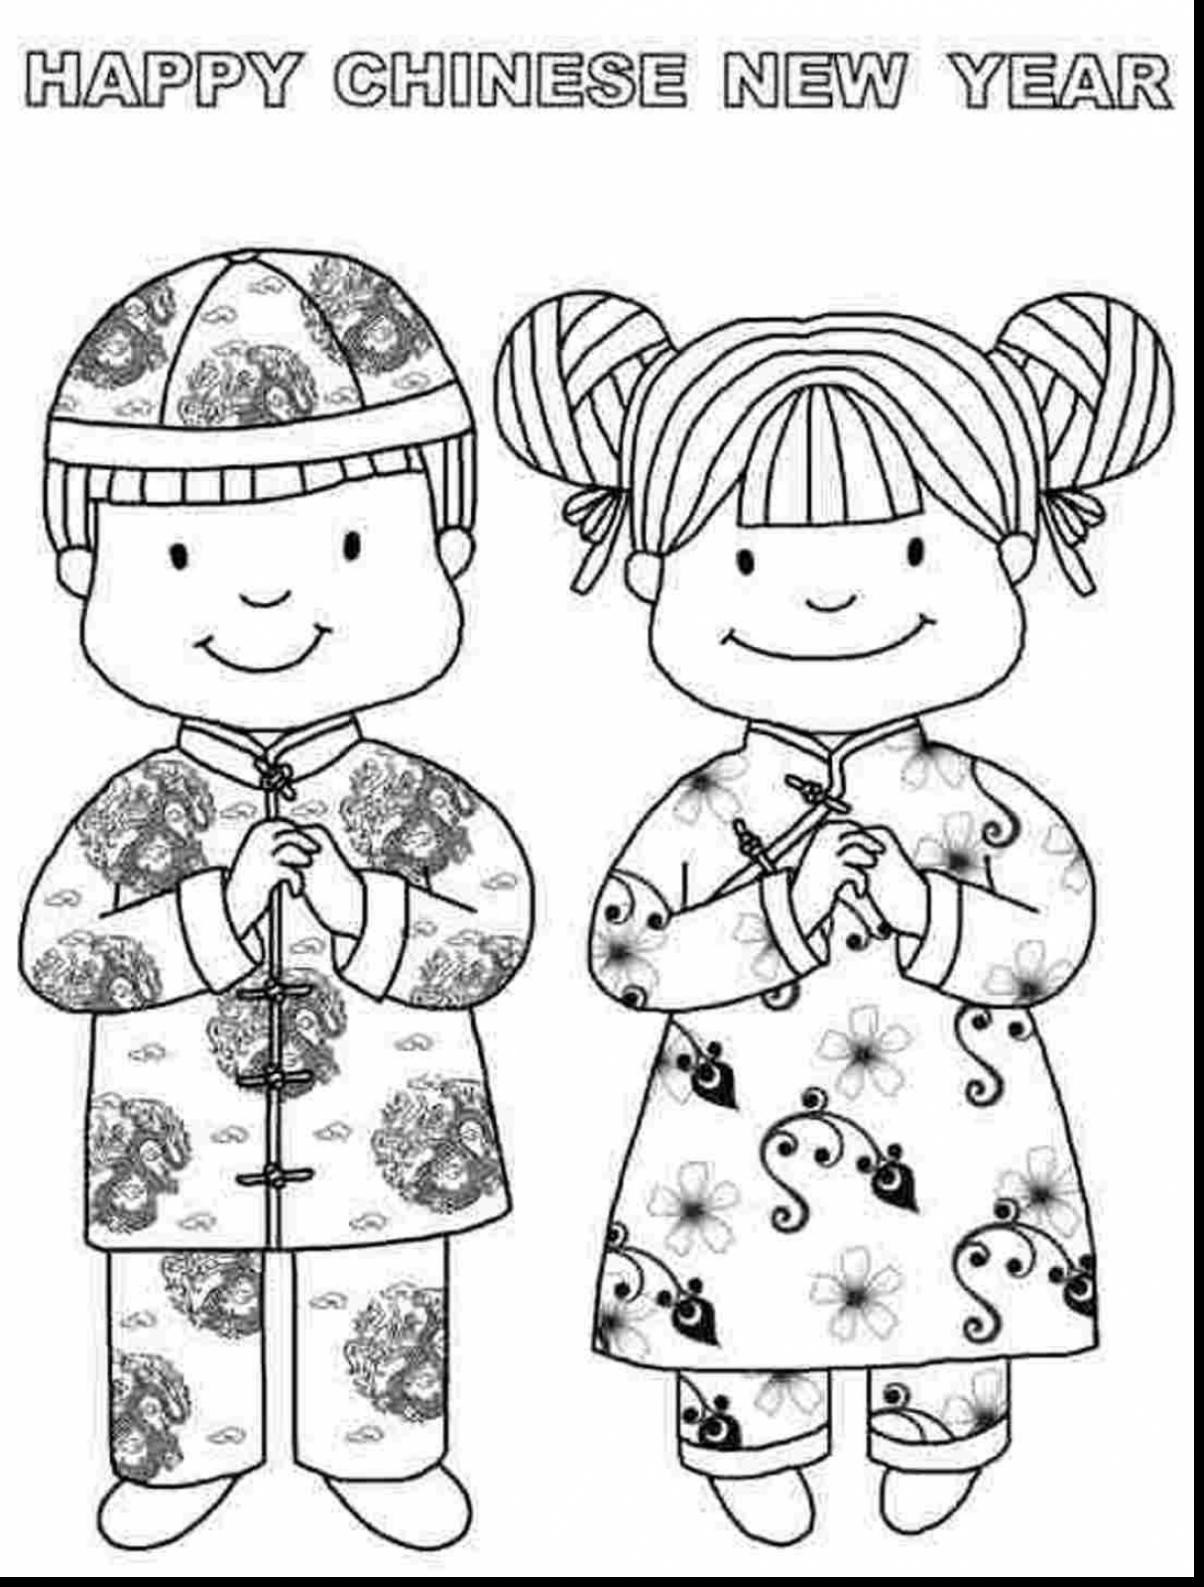 Chinese New Year 2017 Coloring Pages
 Chinese New Year Coloring Pages coloringsuite